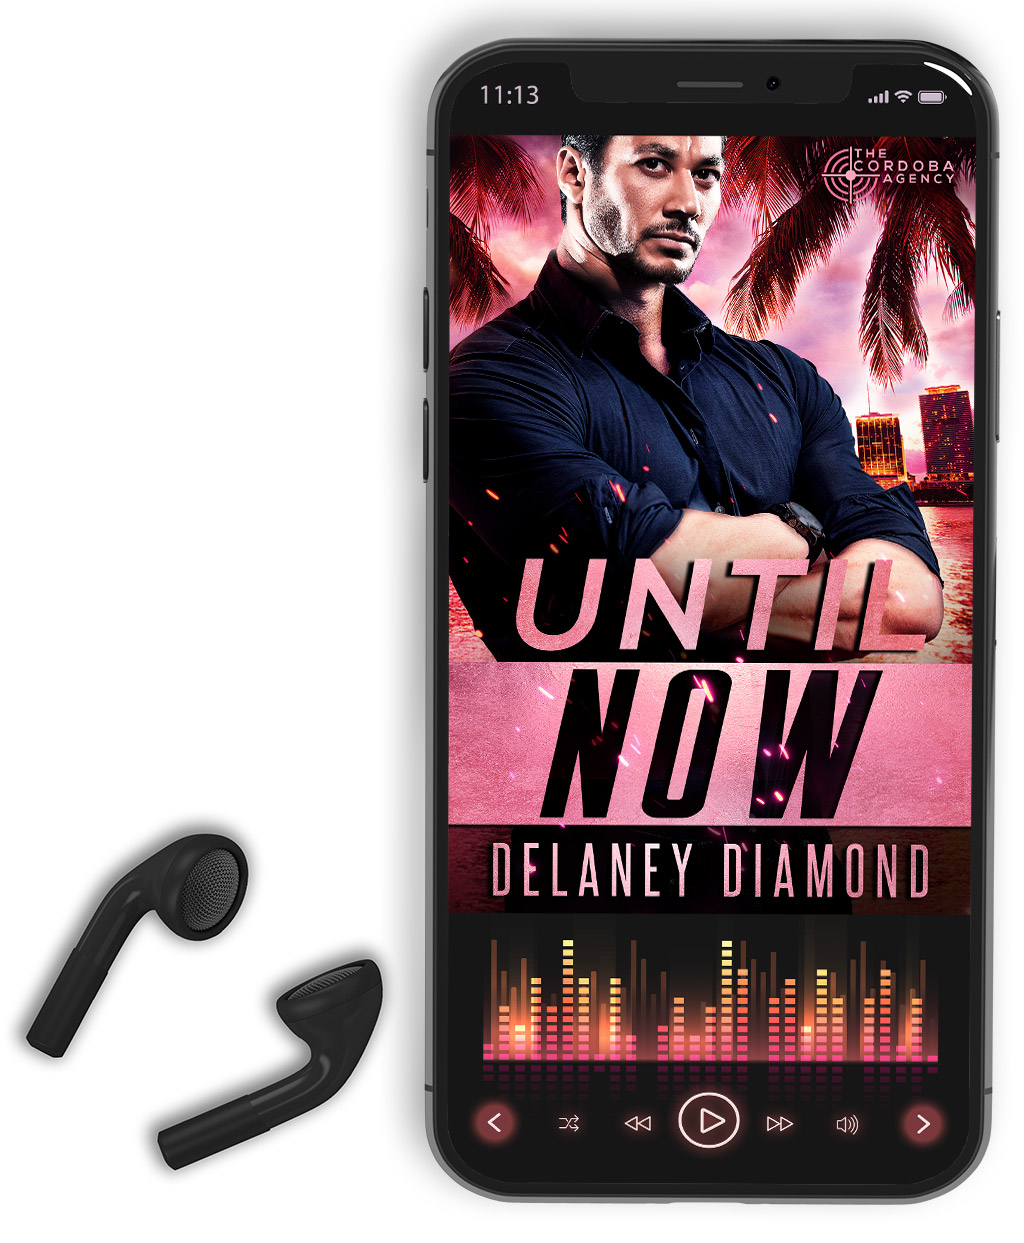 Until Now - The Cordoba Agency series #1 - Audiobook by Delaney Diamond